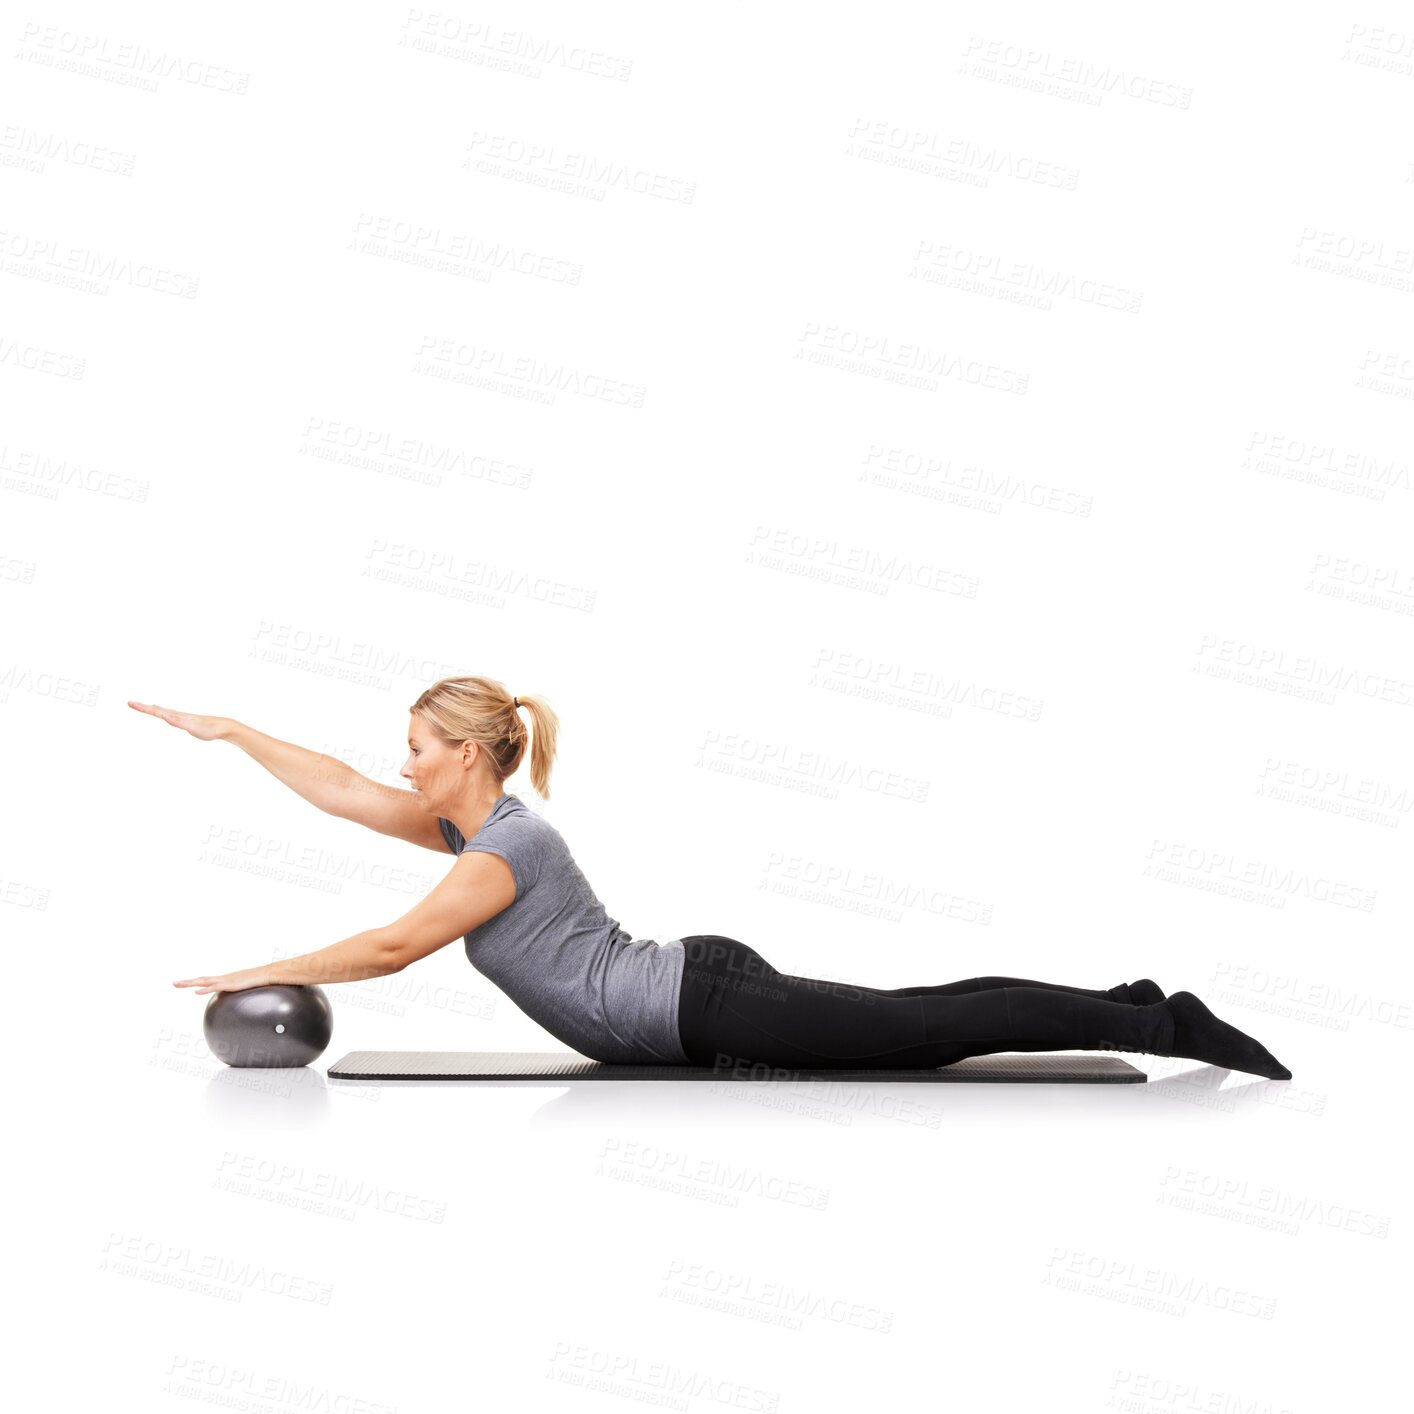 Buy stock photo Stretching arms, workout or woman on ball in pilates, exercise or body health isolated on a white studio background mockup space. Flexible, mat or person on equipment for balance, training or fitness